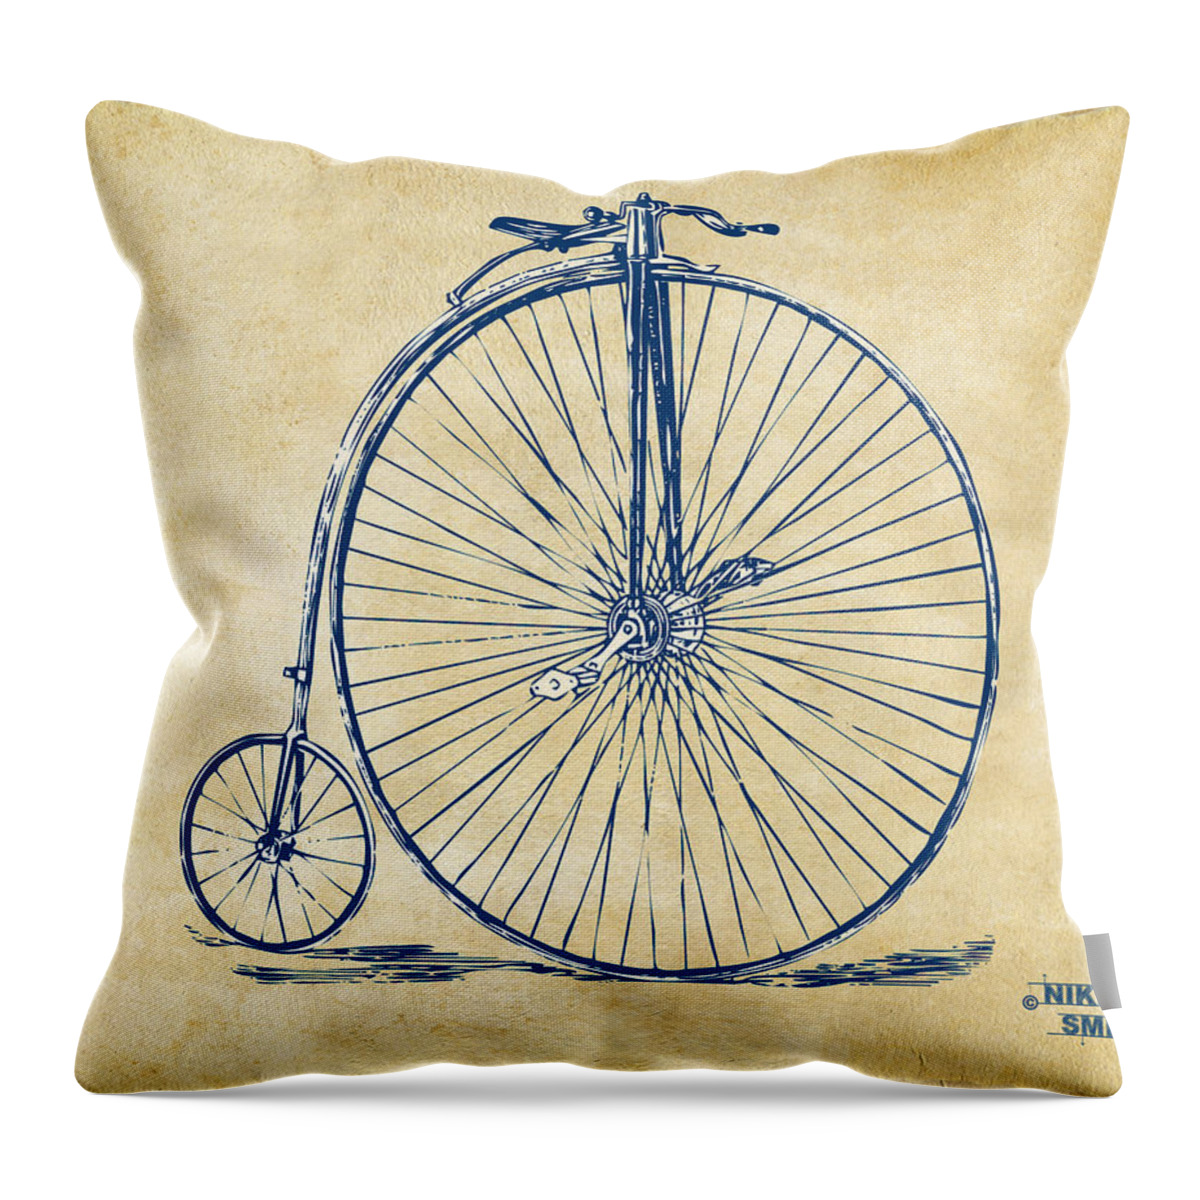 Penny-farthing Throw Pillow featuring the digital art Penny-Farthing 1867 High Wheeler Bicycle Vintage by Nikki Marie Smith